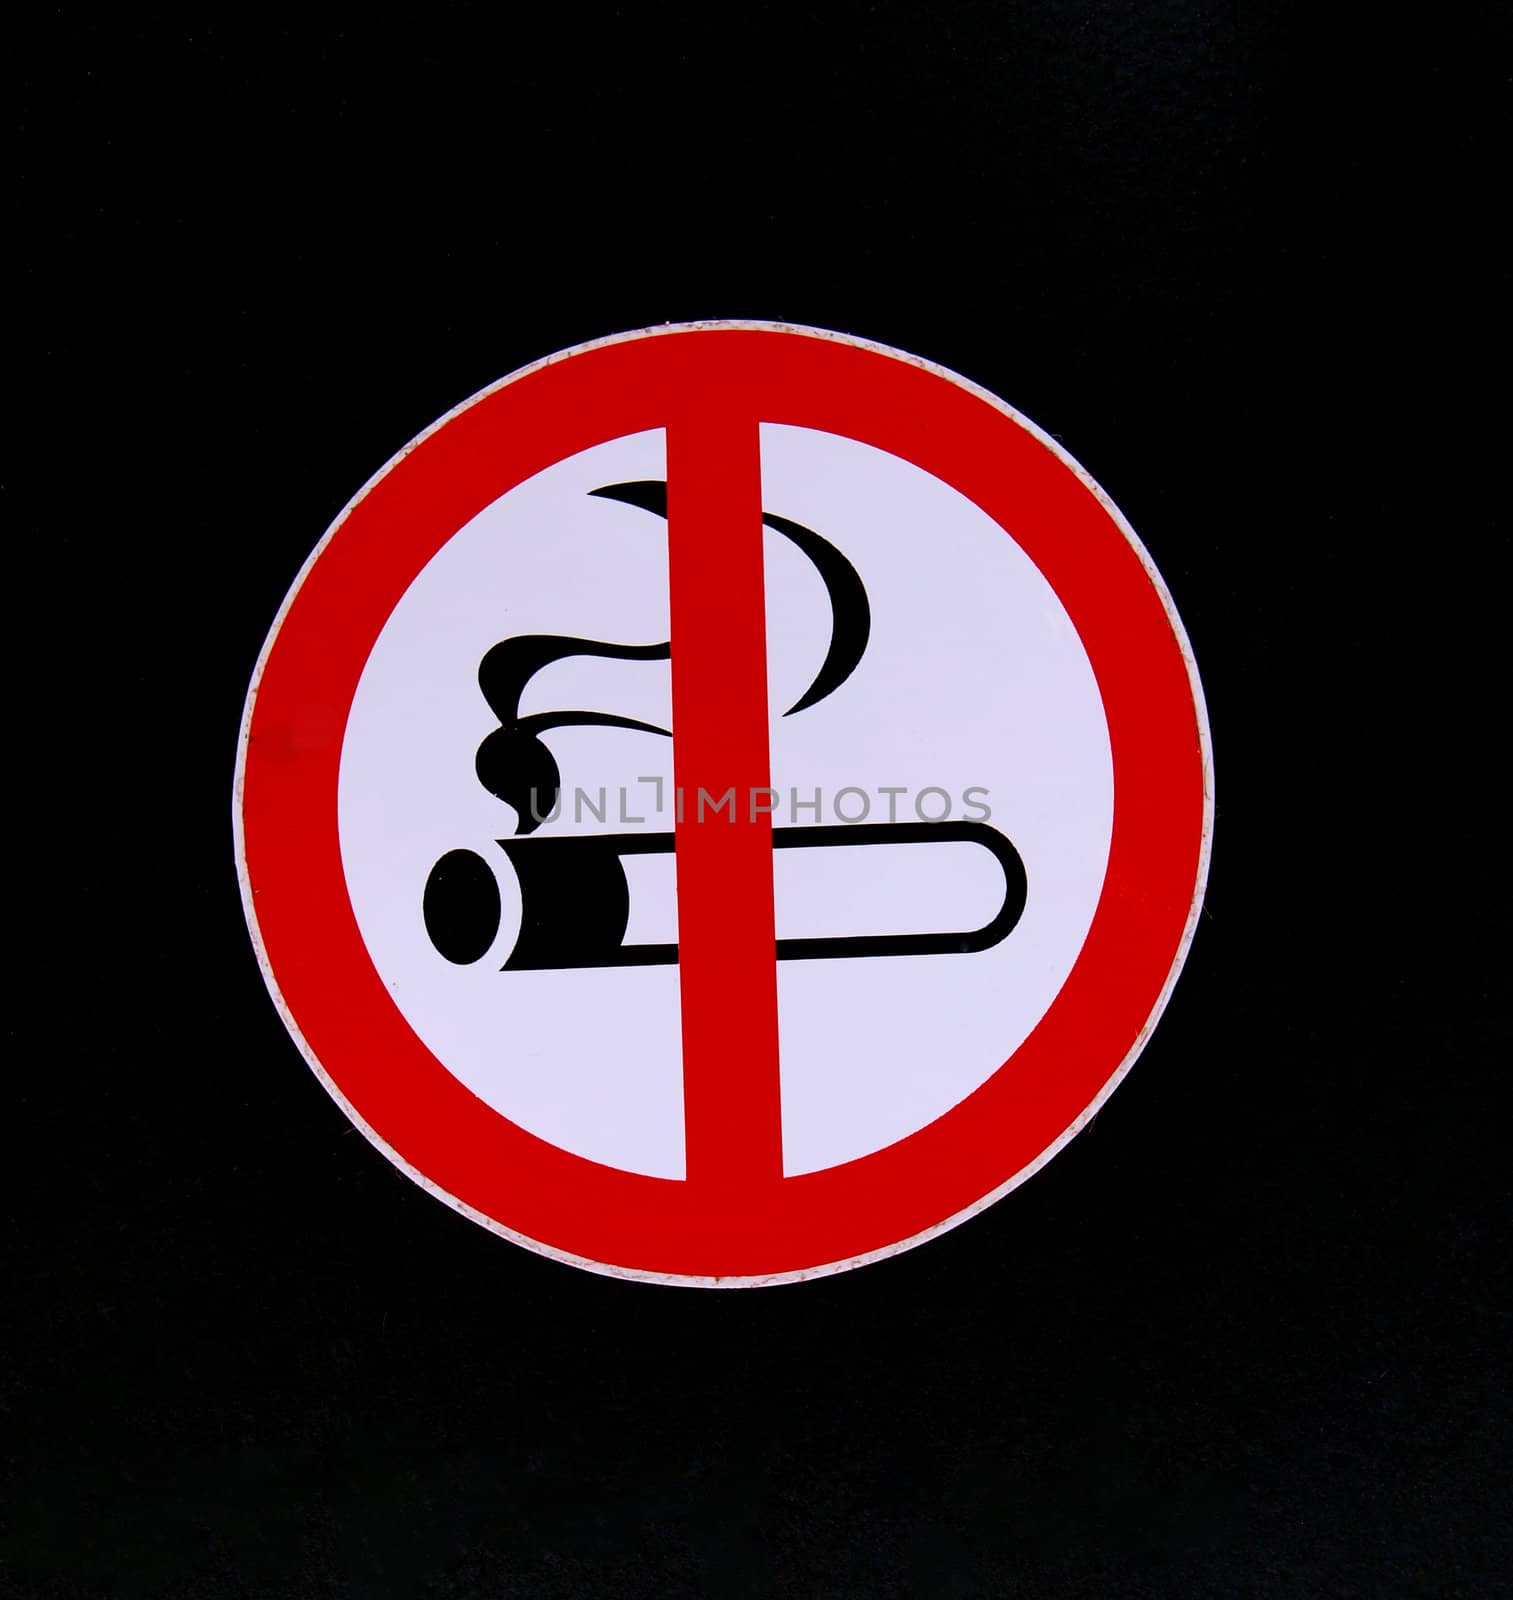 No smoking sign on a black background.